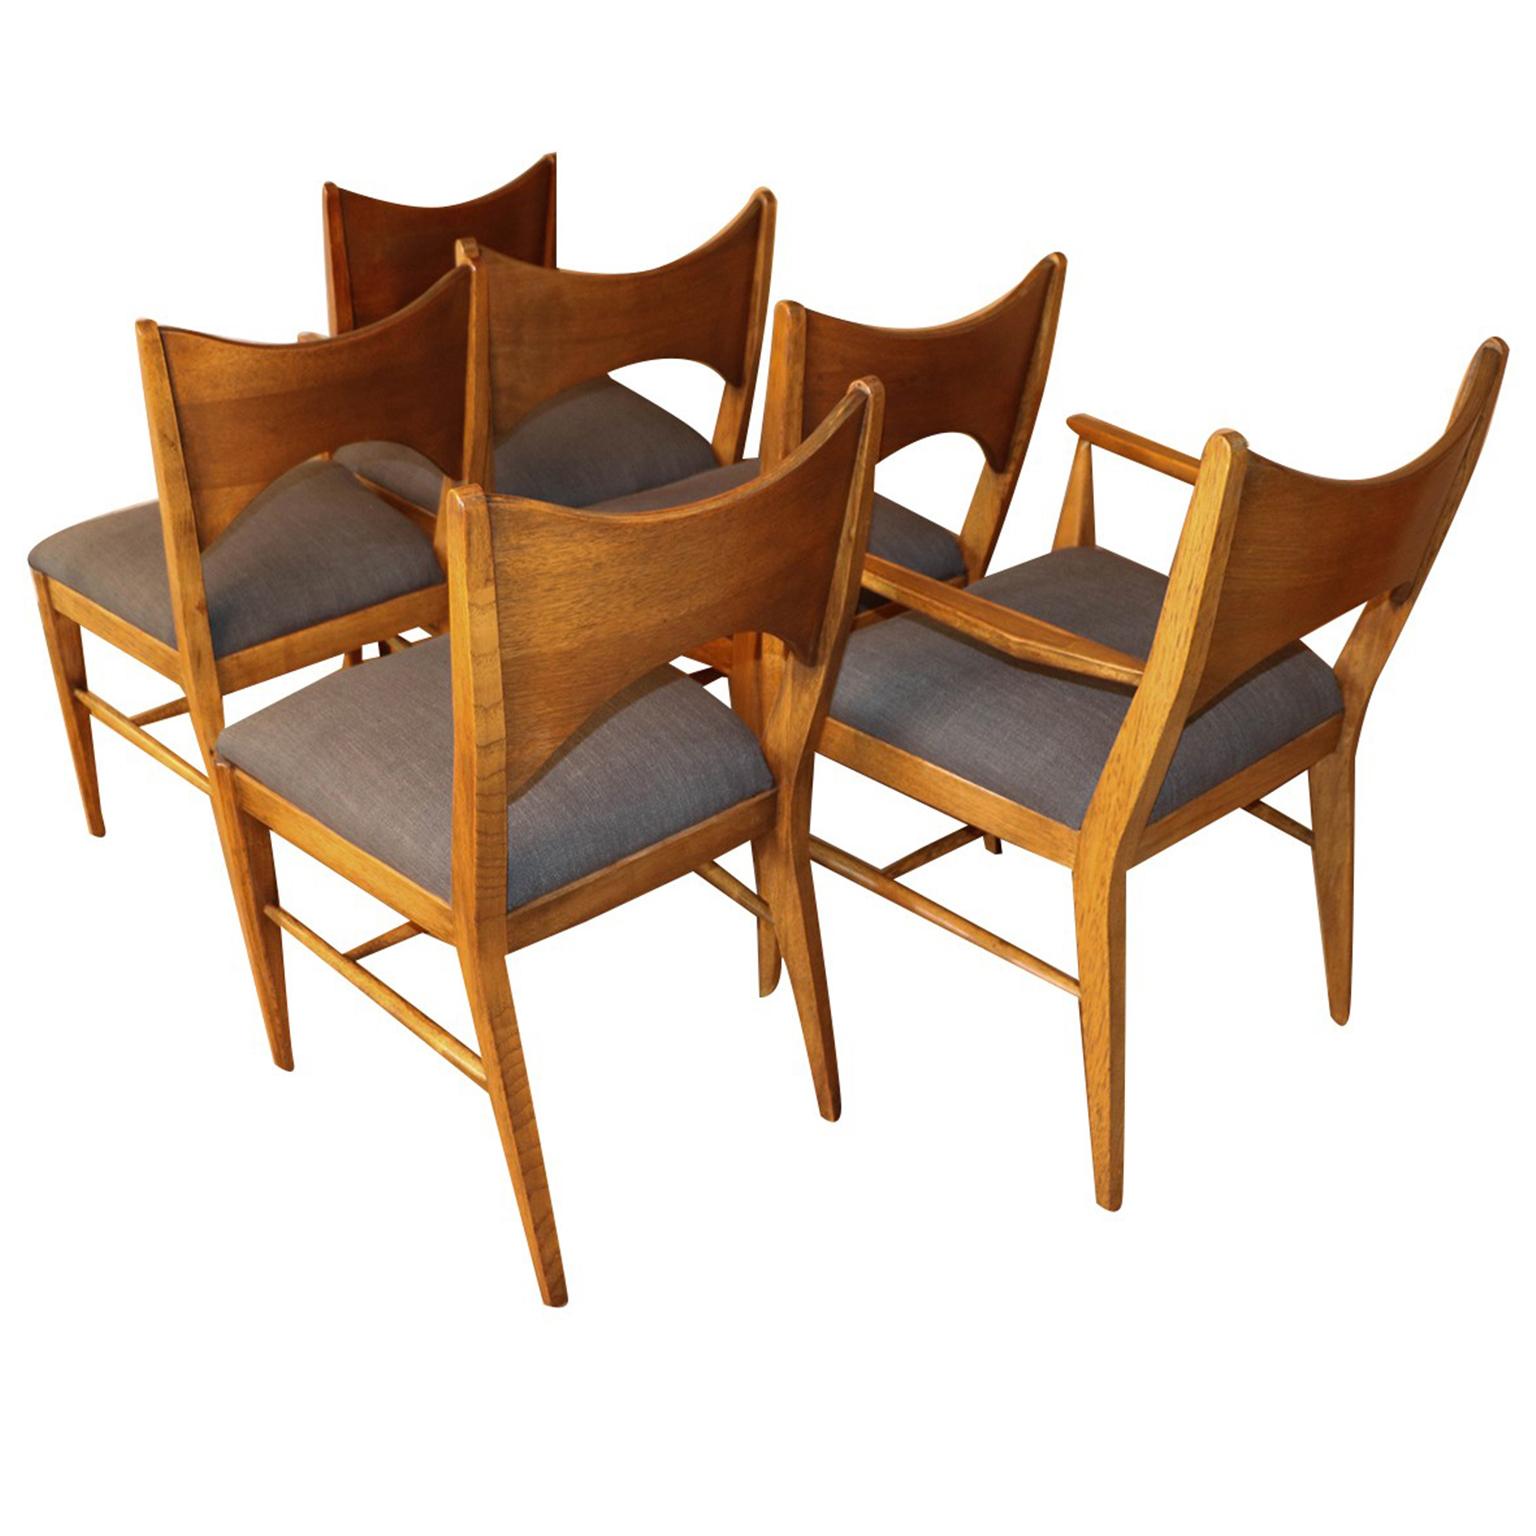 Set of six stunning Mid-Century Modern walnut dining chairs from Broyhill Premier’s “Saga” collection, in the style of Paul McCobb. The solid walnut frames feature modern styling with a distinct beautiful design. Sculpturally carved bow-tie